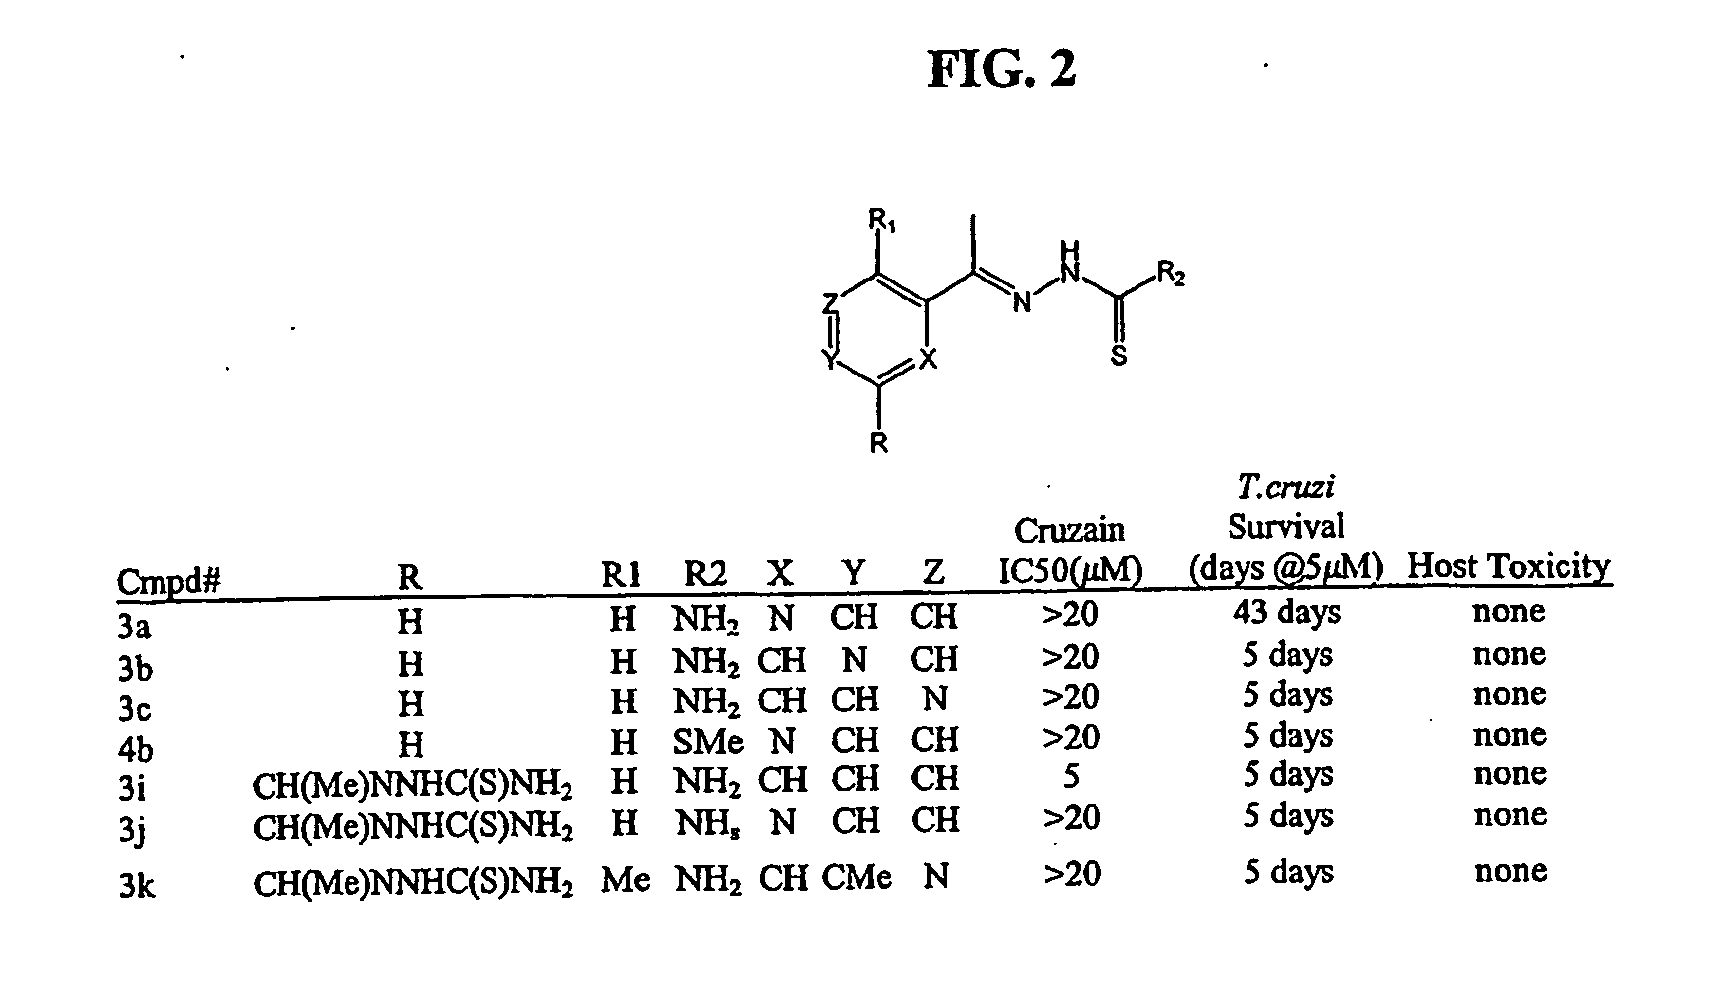 Anti-parasitic compounds and methods of their use